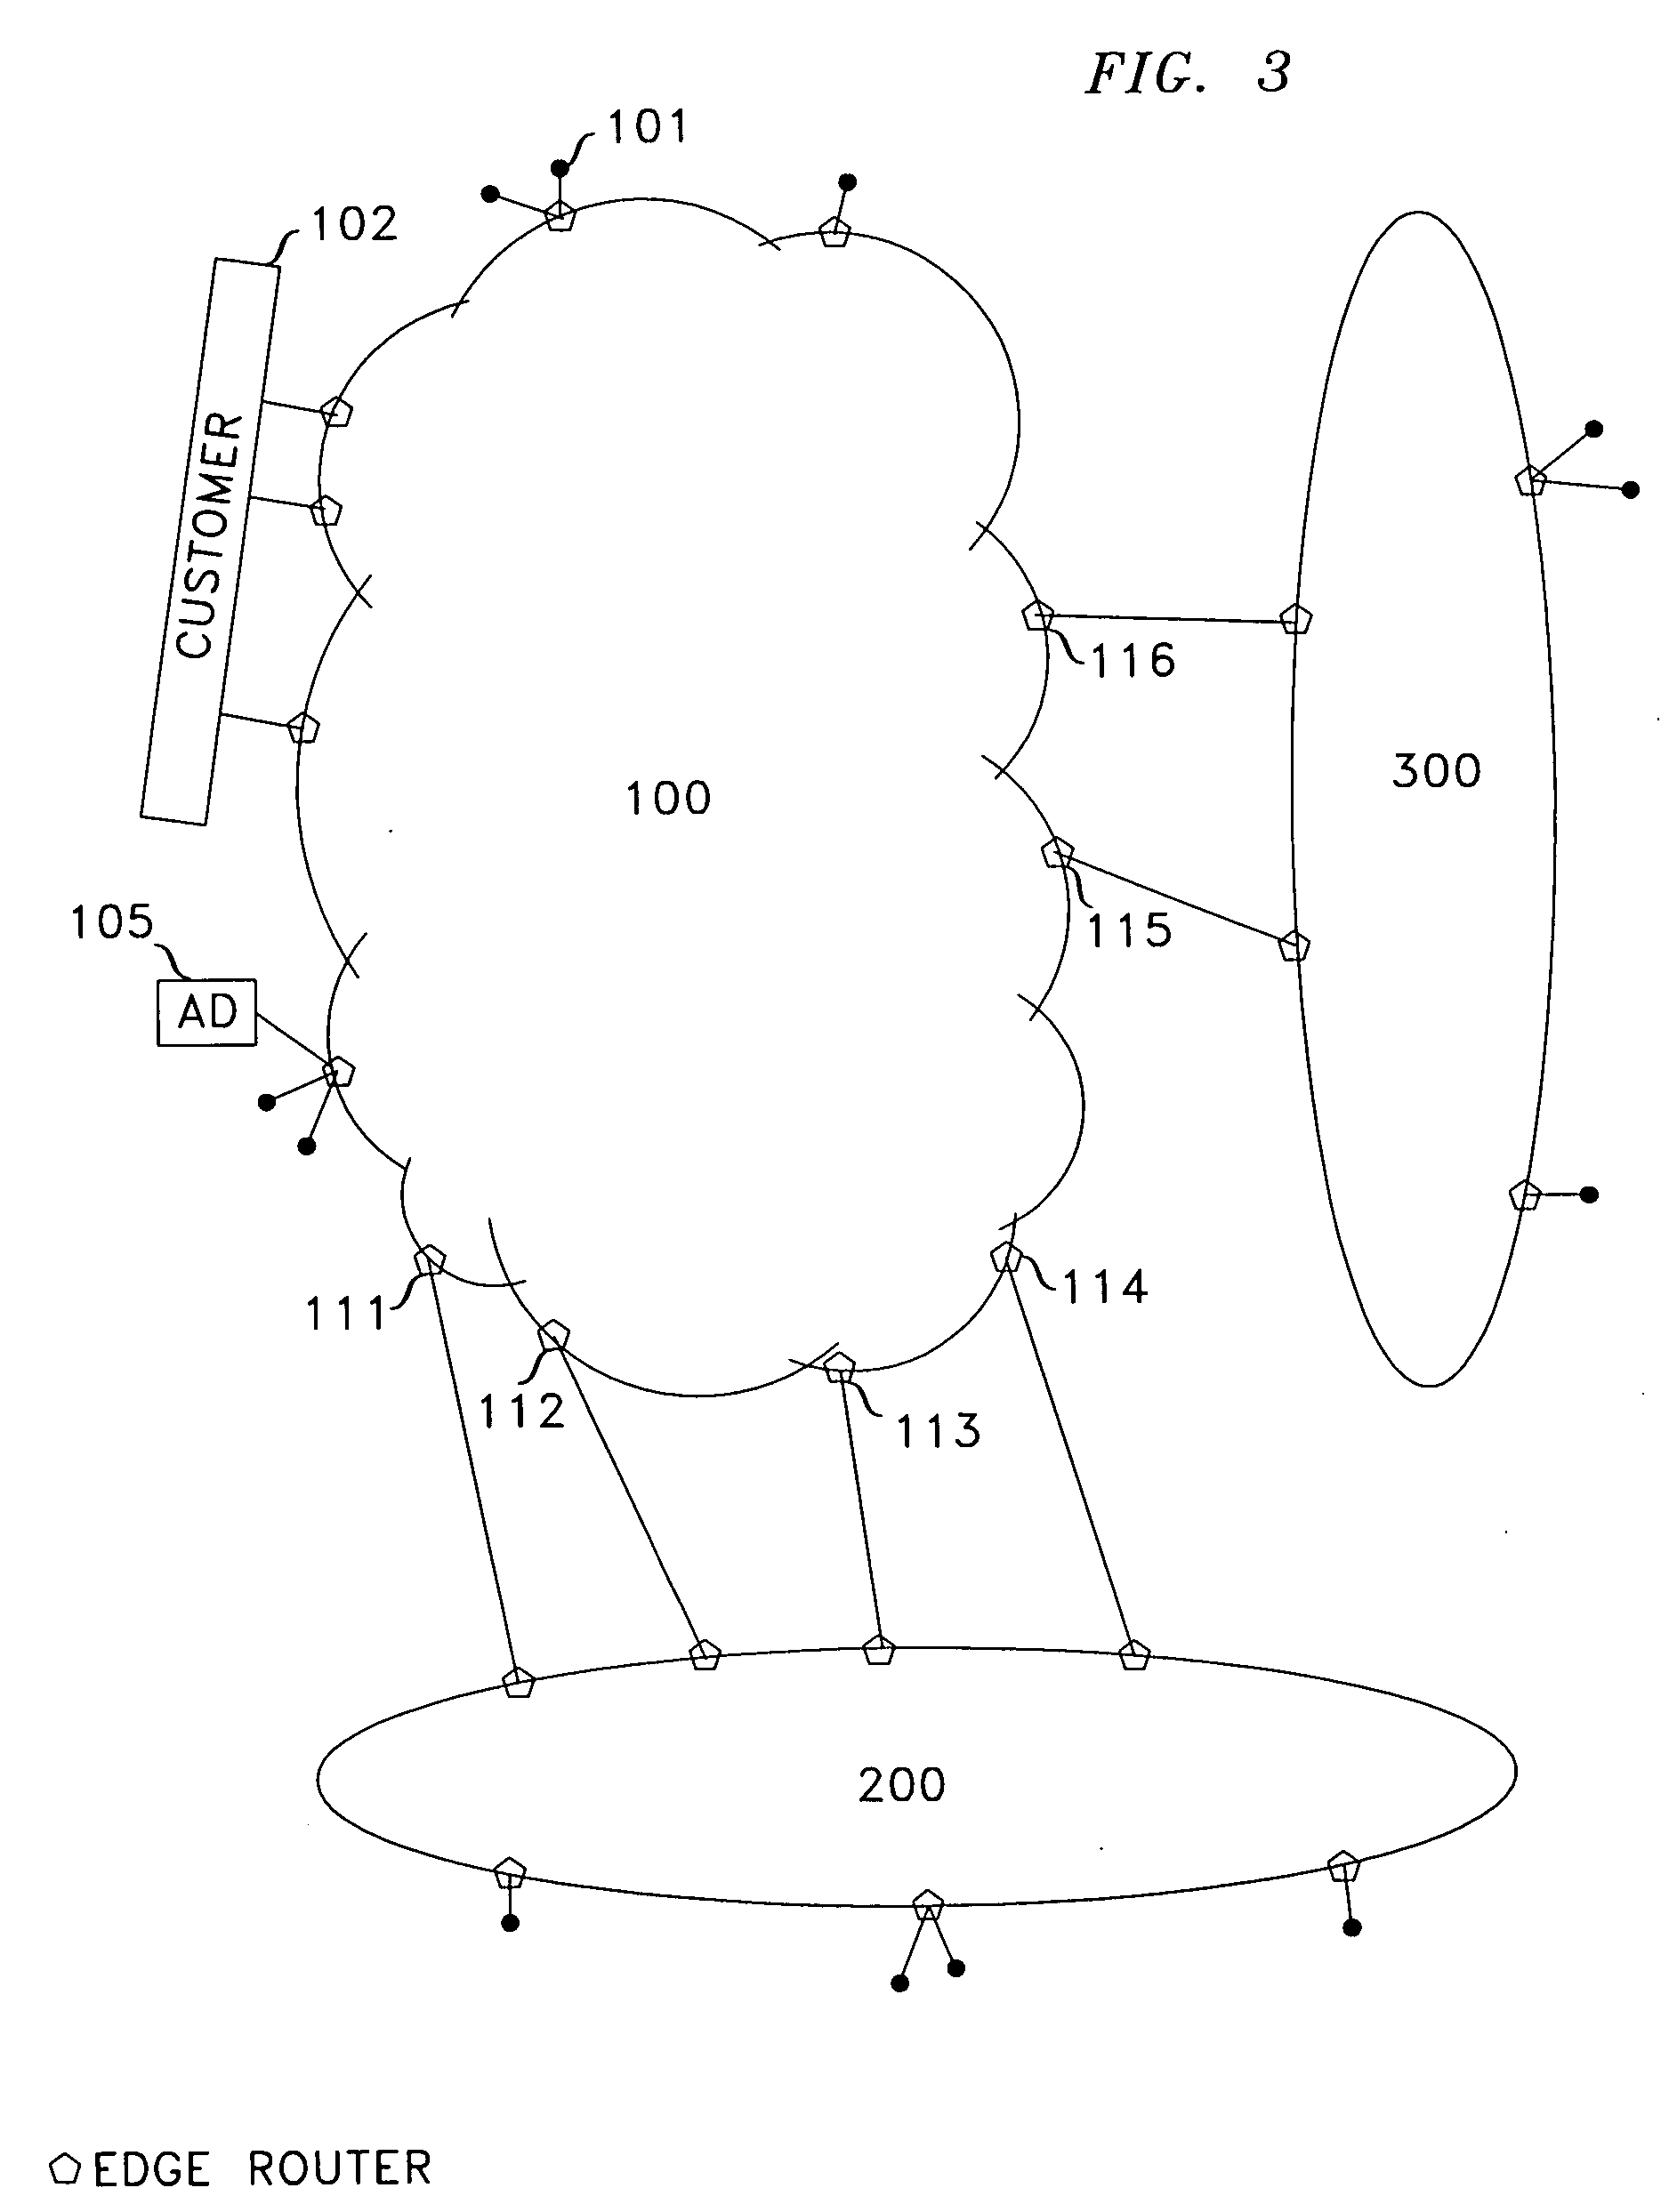 Method for controlling traffic balance between peering networks